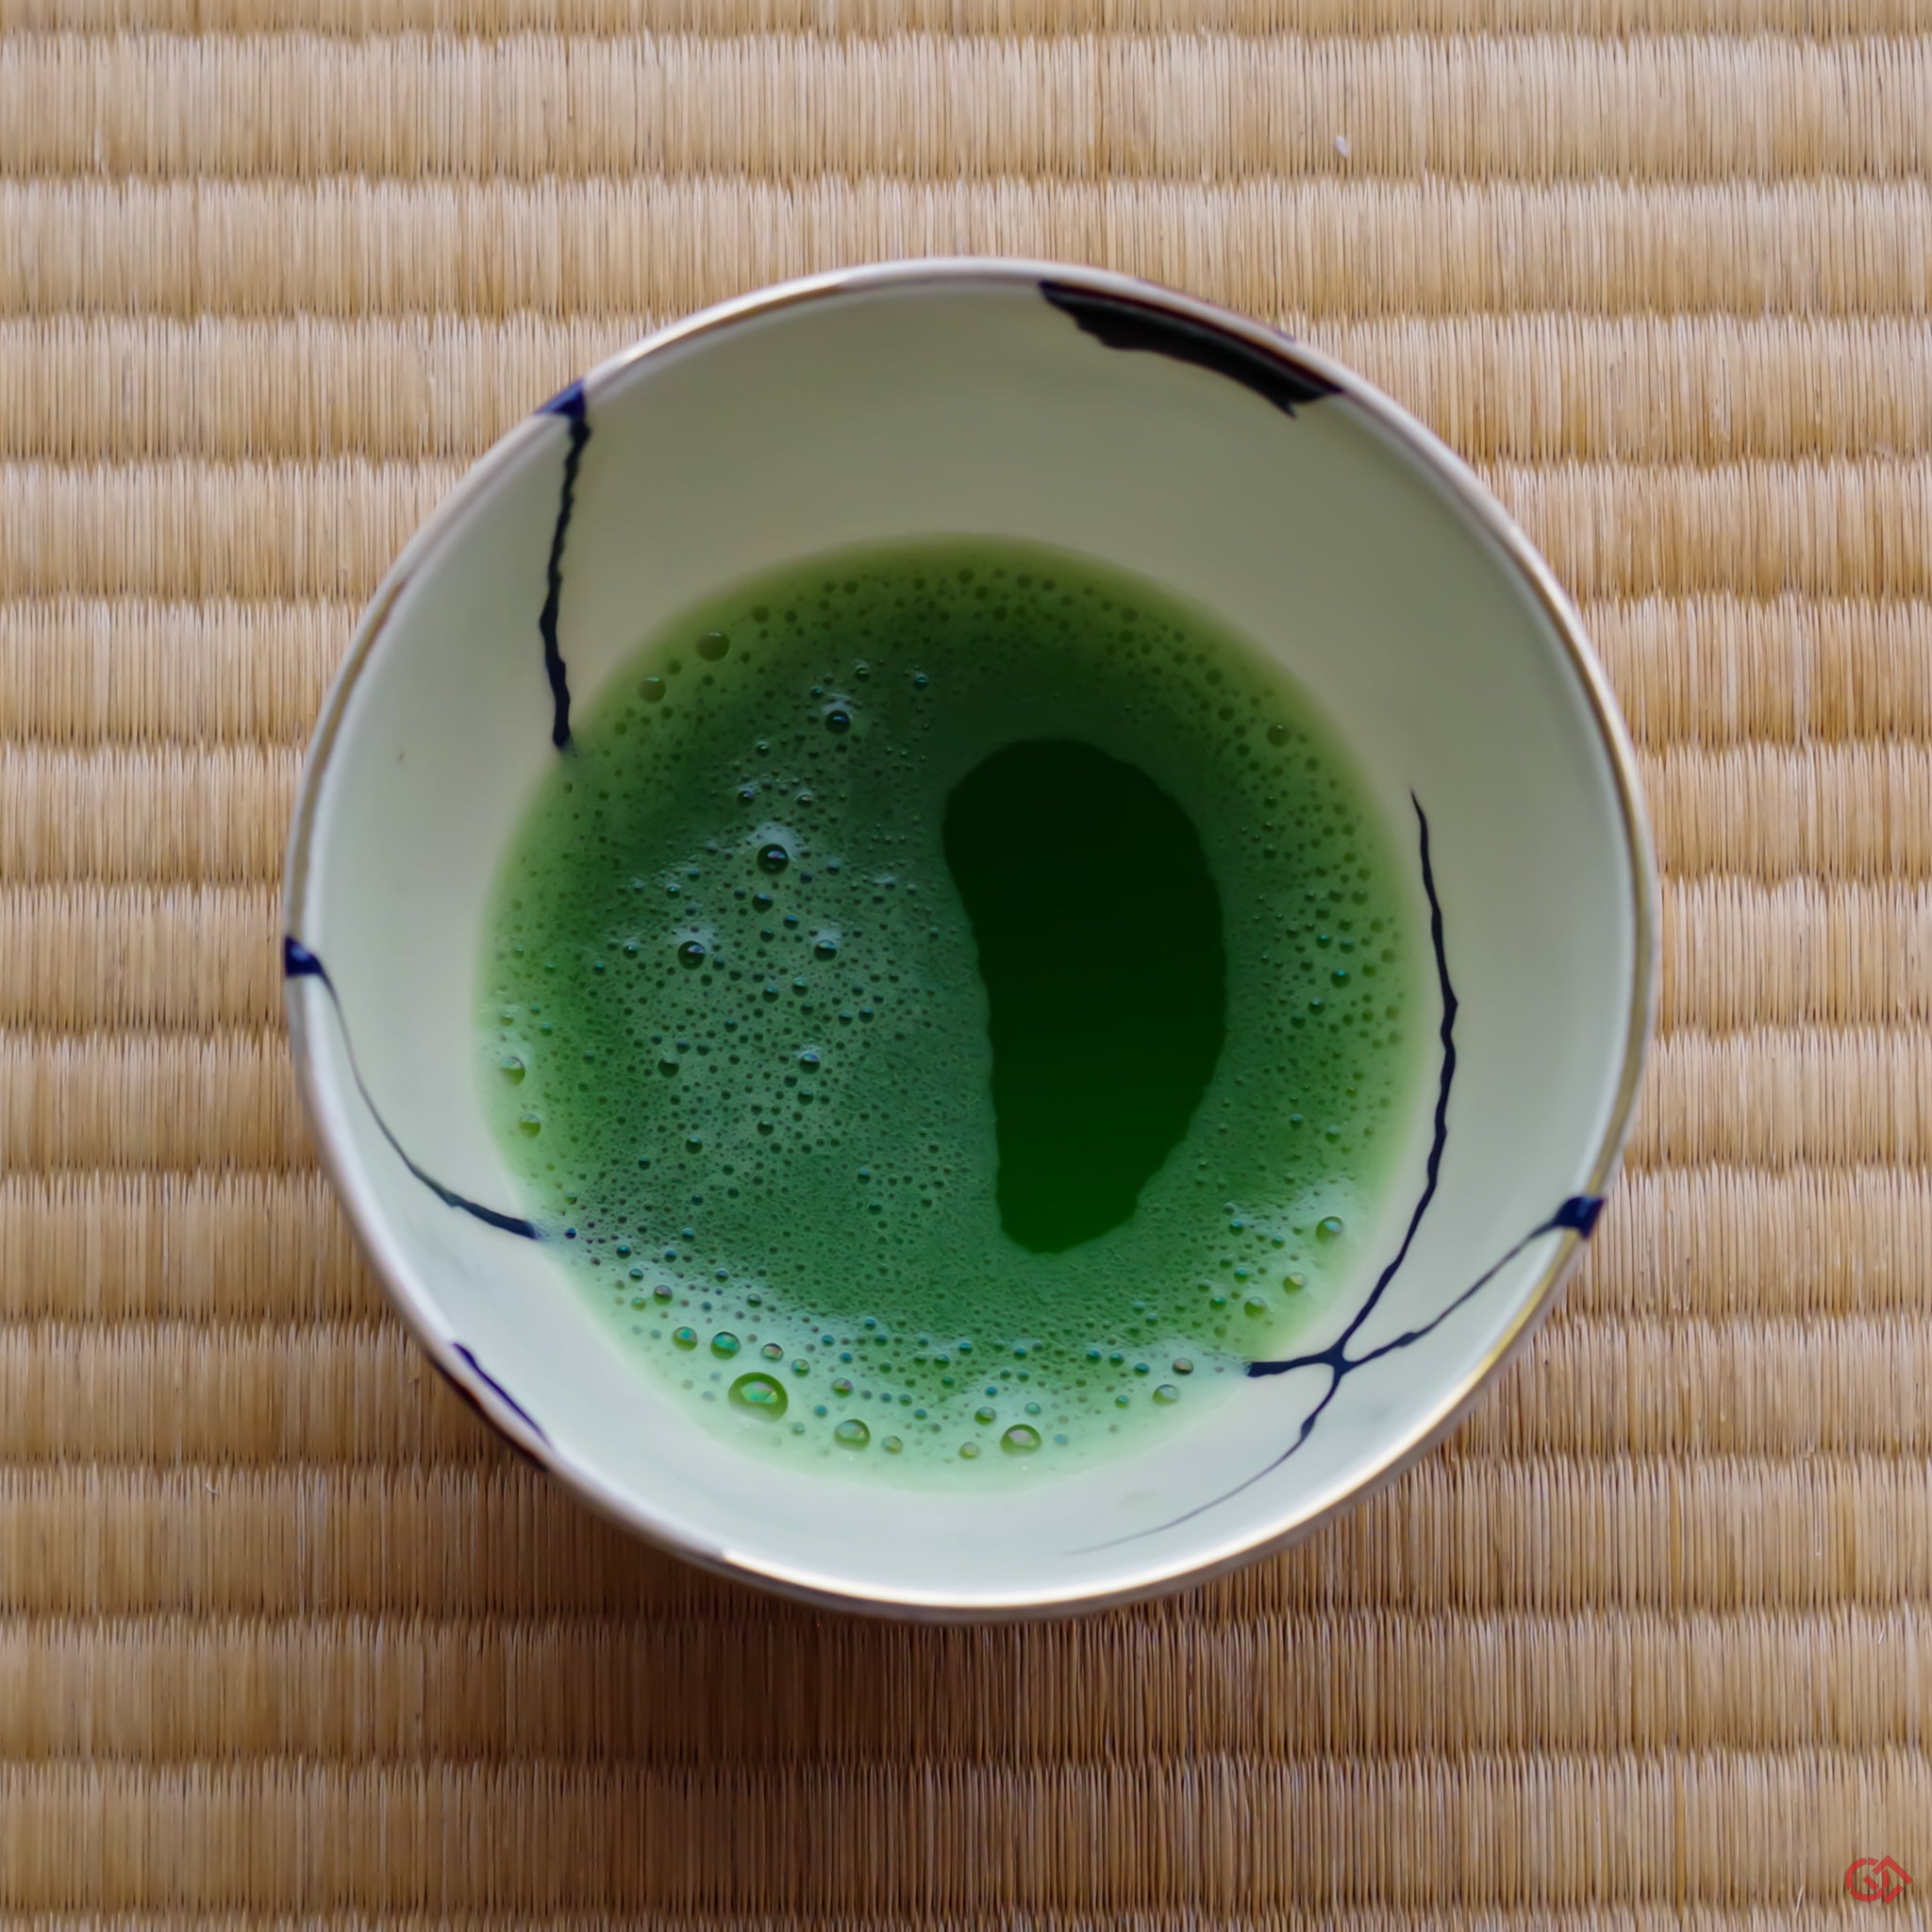 A photo of an authentic Kintsugi pottery piece being used in a real-world setting, such as a tea bowl of green tea being poured into a Kintsugi teabowl.